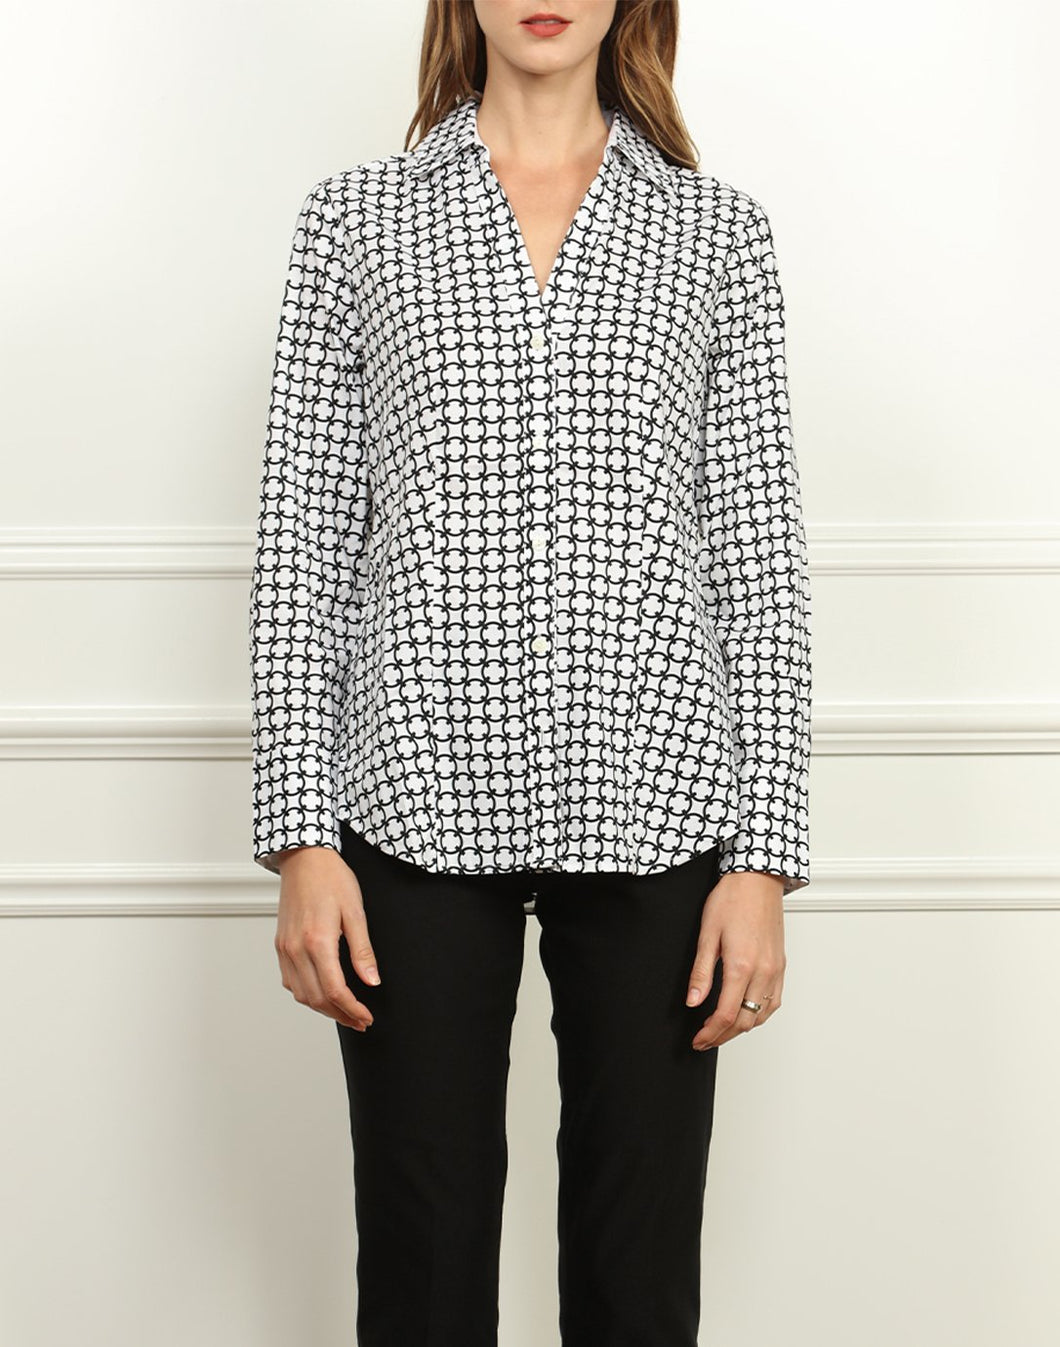 Kelly Double Collar Shirt In Black and White Chainlink Print